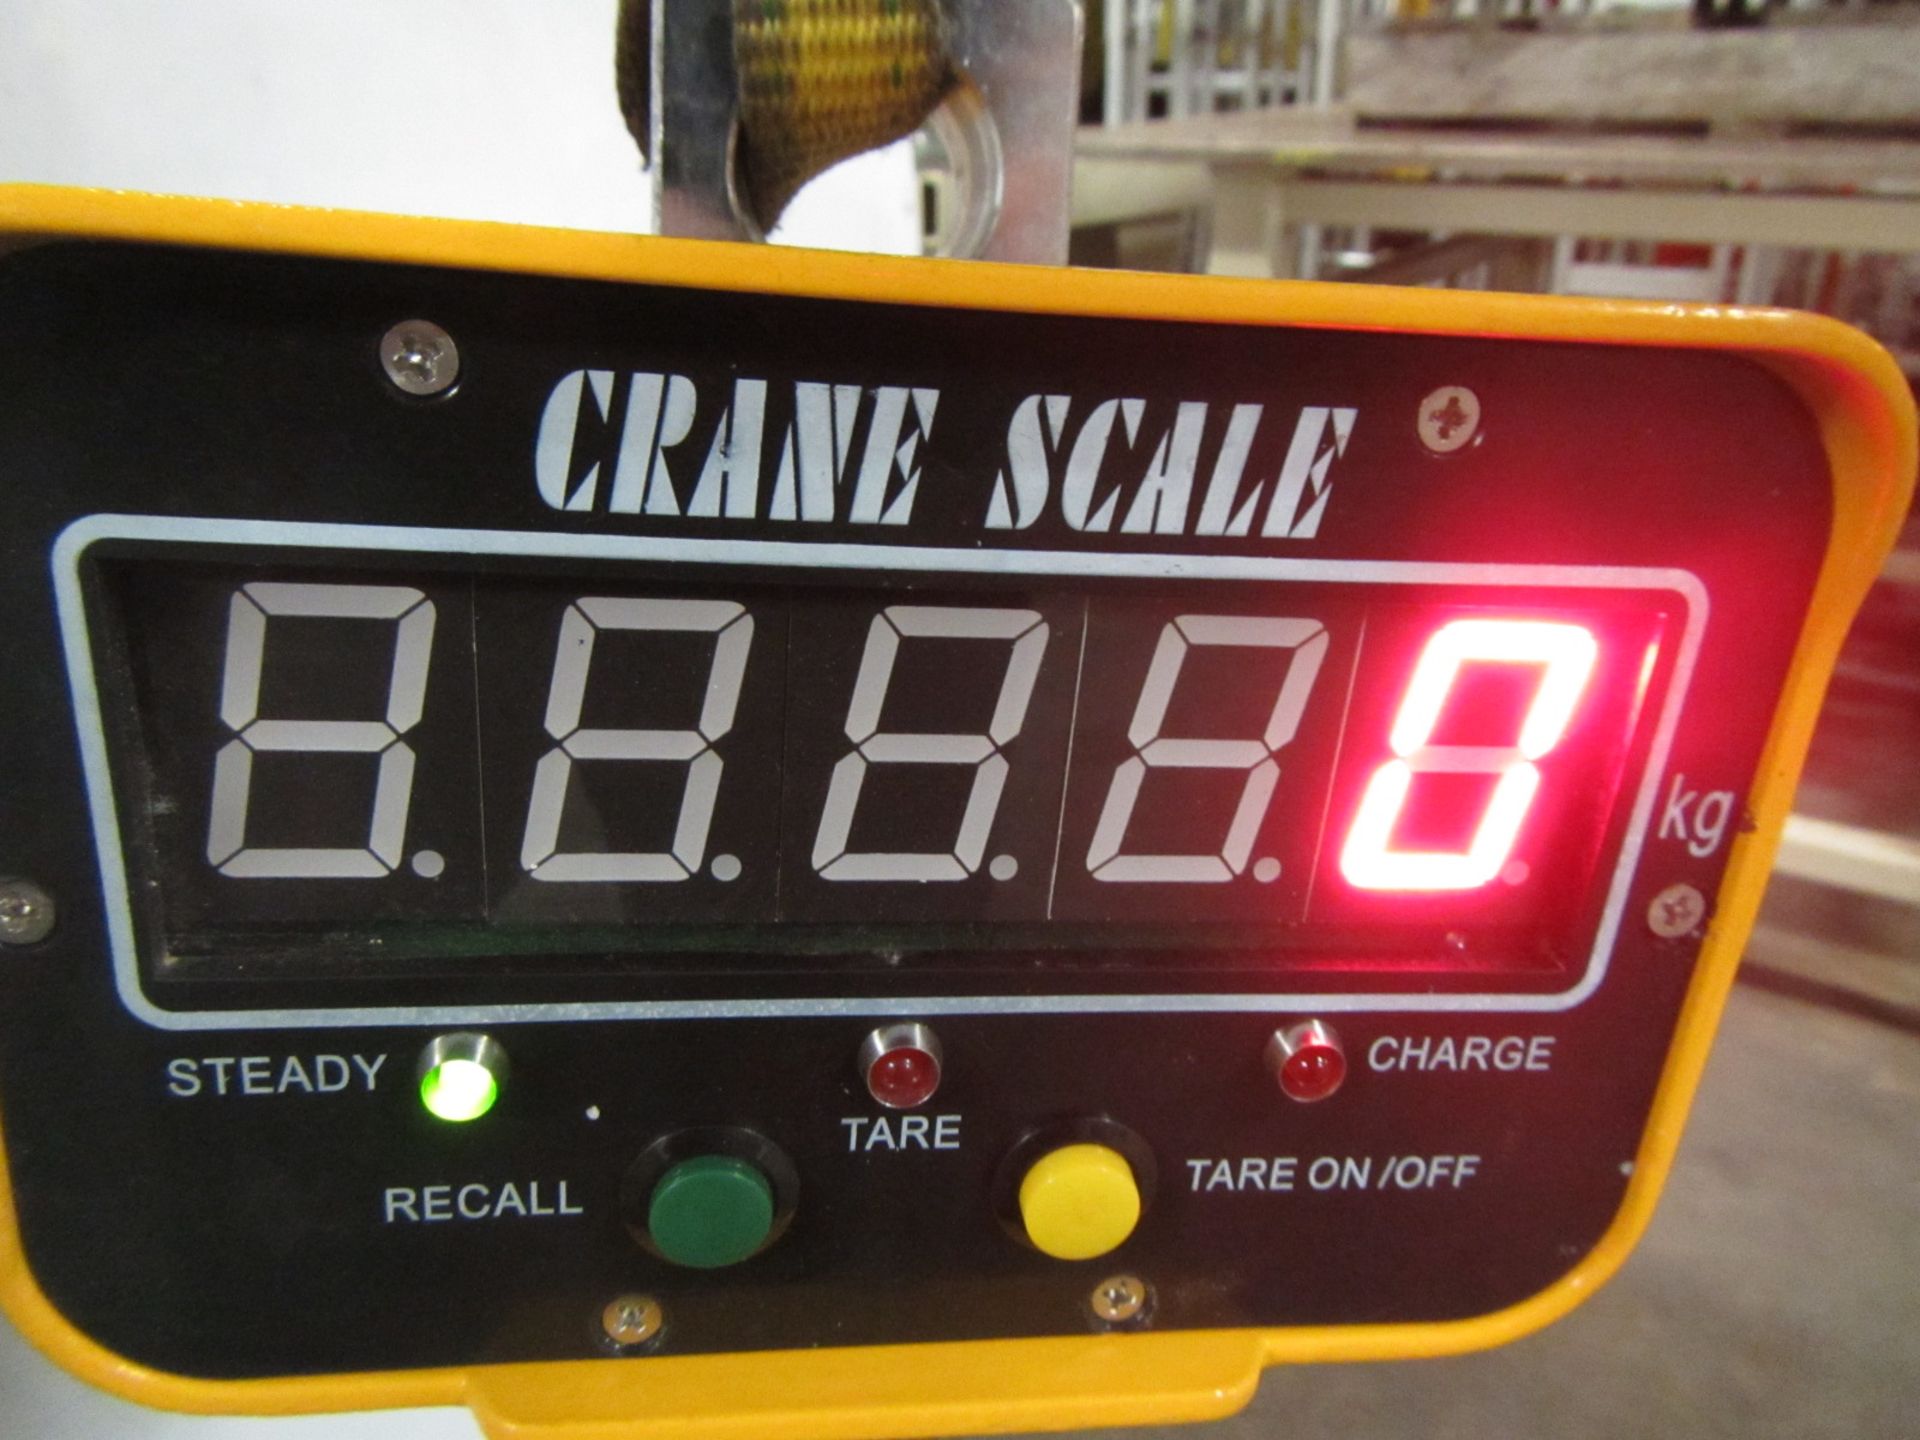 Challenger MINT Digital Crane Scale 10,000lbs 5 ton Capacity - complete with remote control and - Image 2 of 3